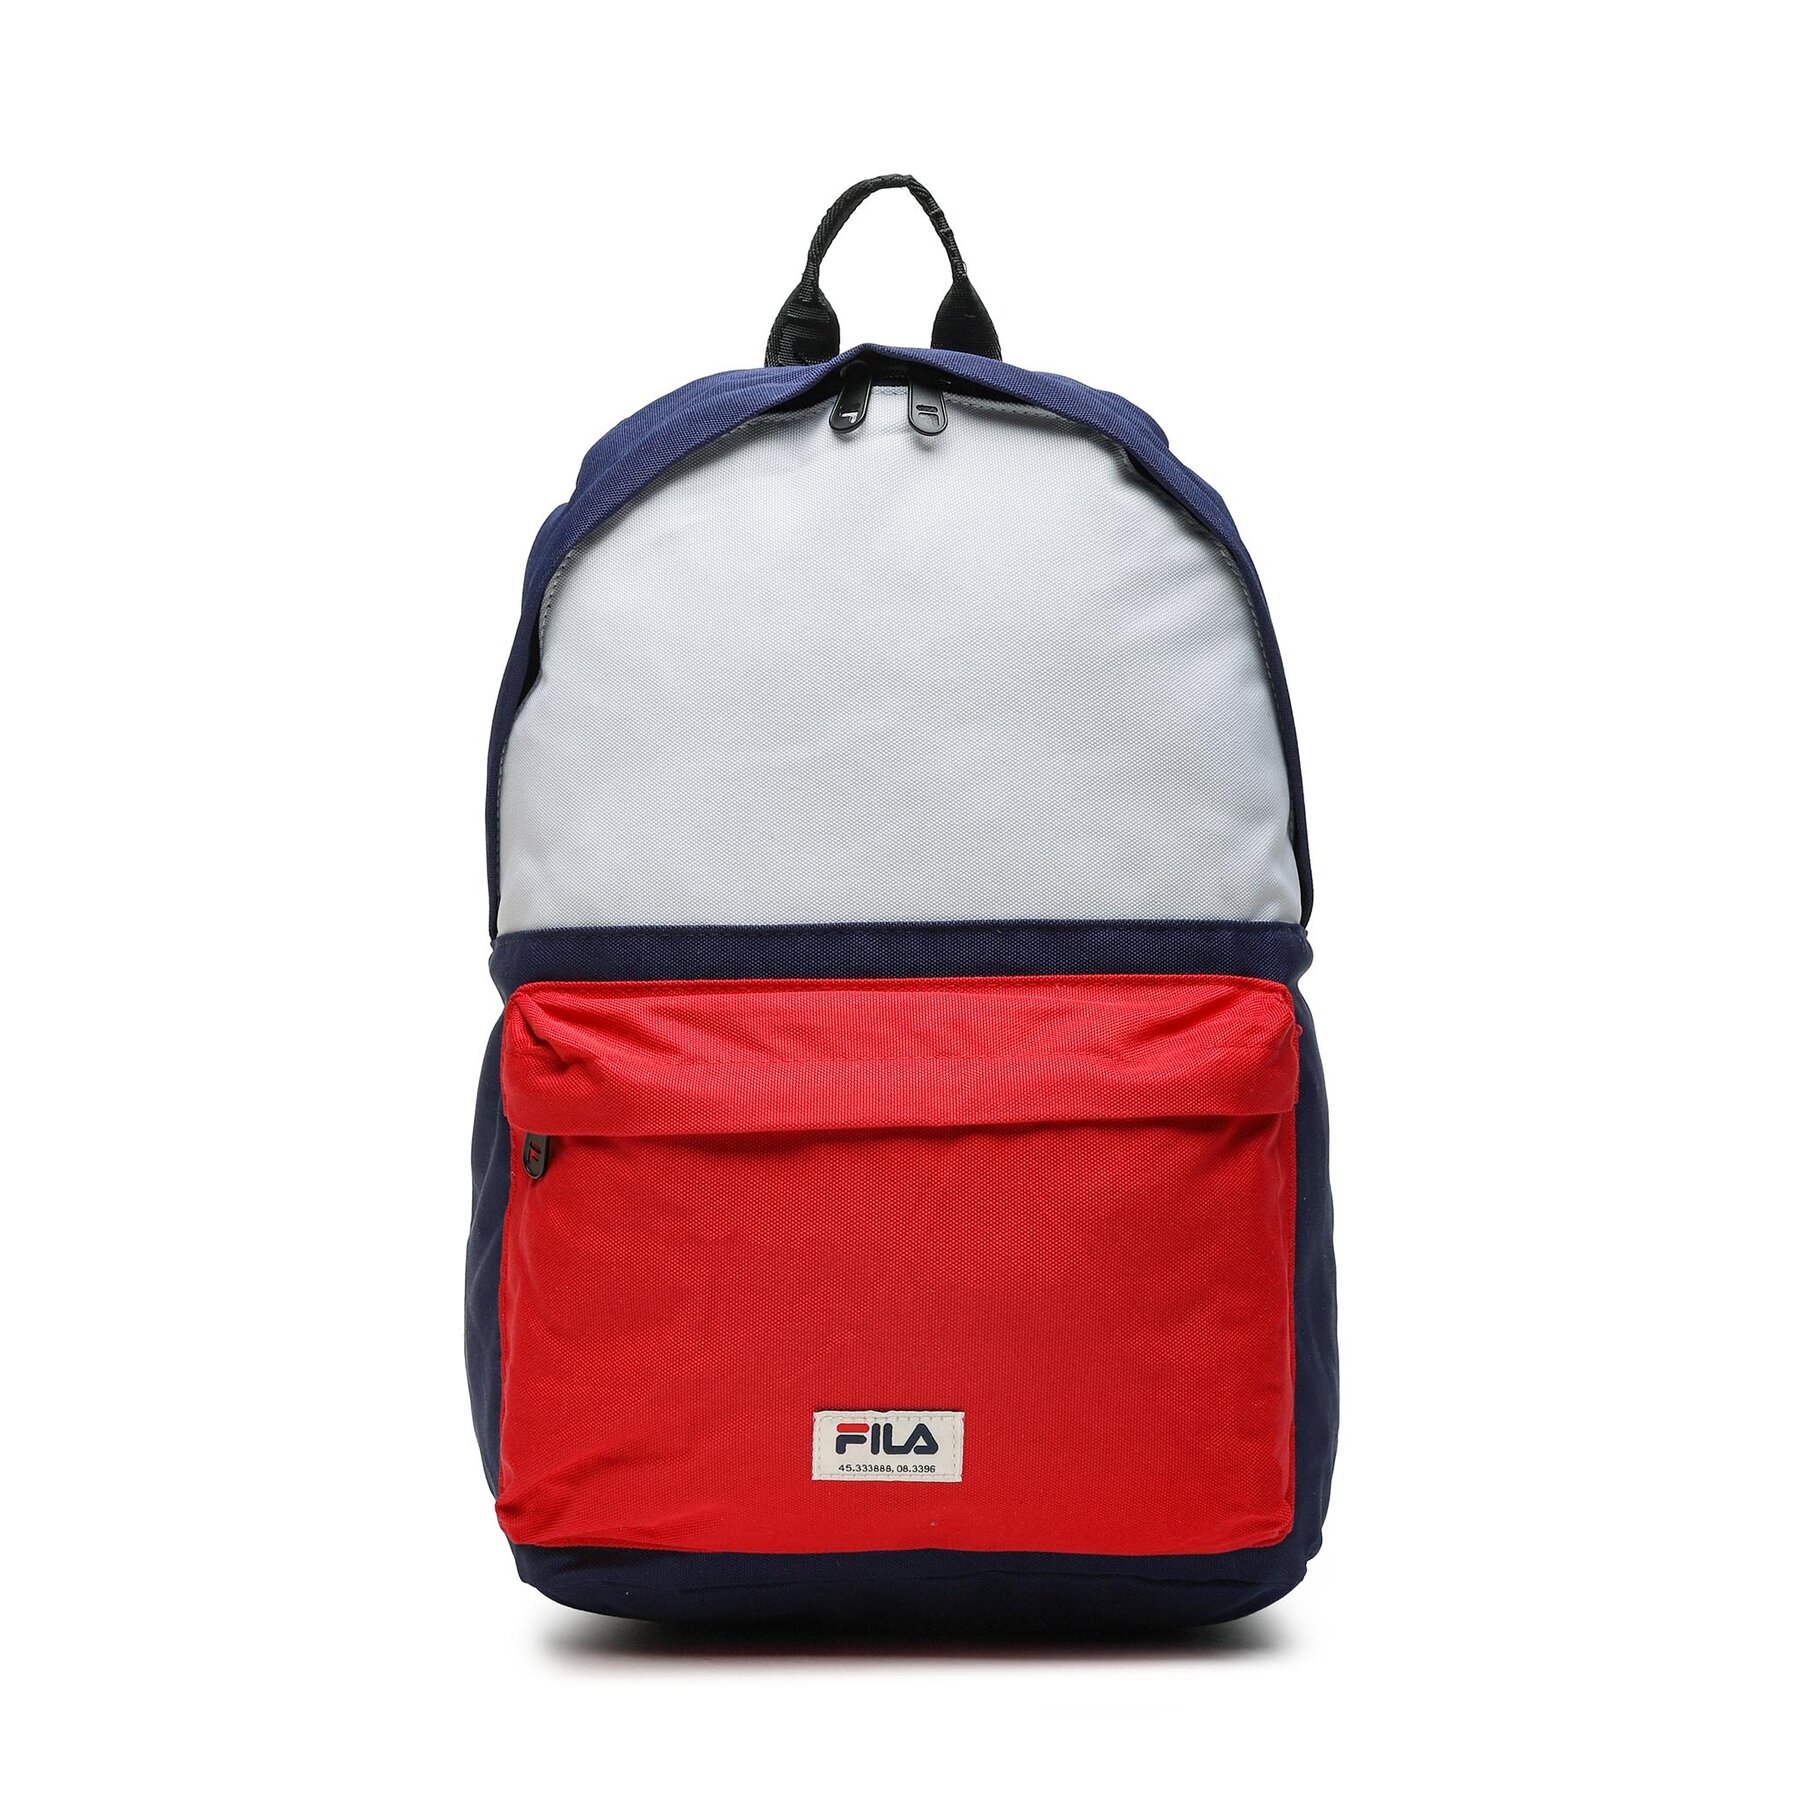 Rucksack Fila Boma Badge Backpack S’Cool Two FBU0079 Medieval Blue/Bright White/True Red 53007 von Fila